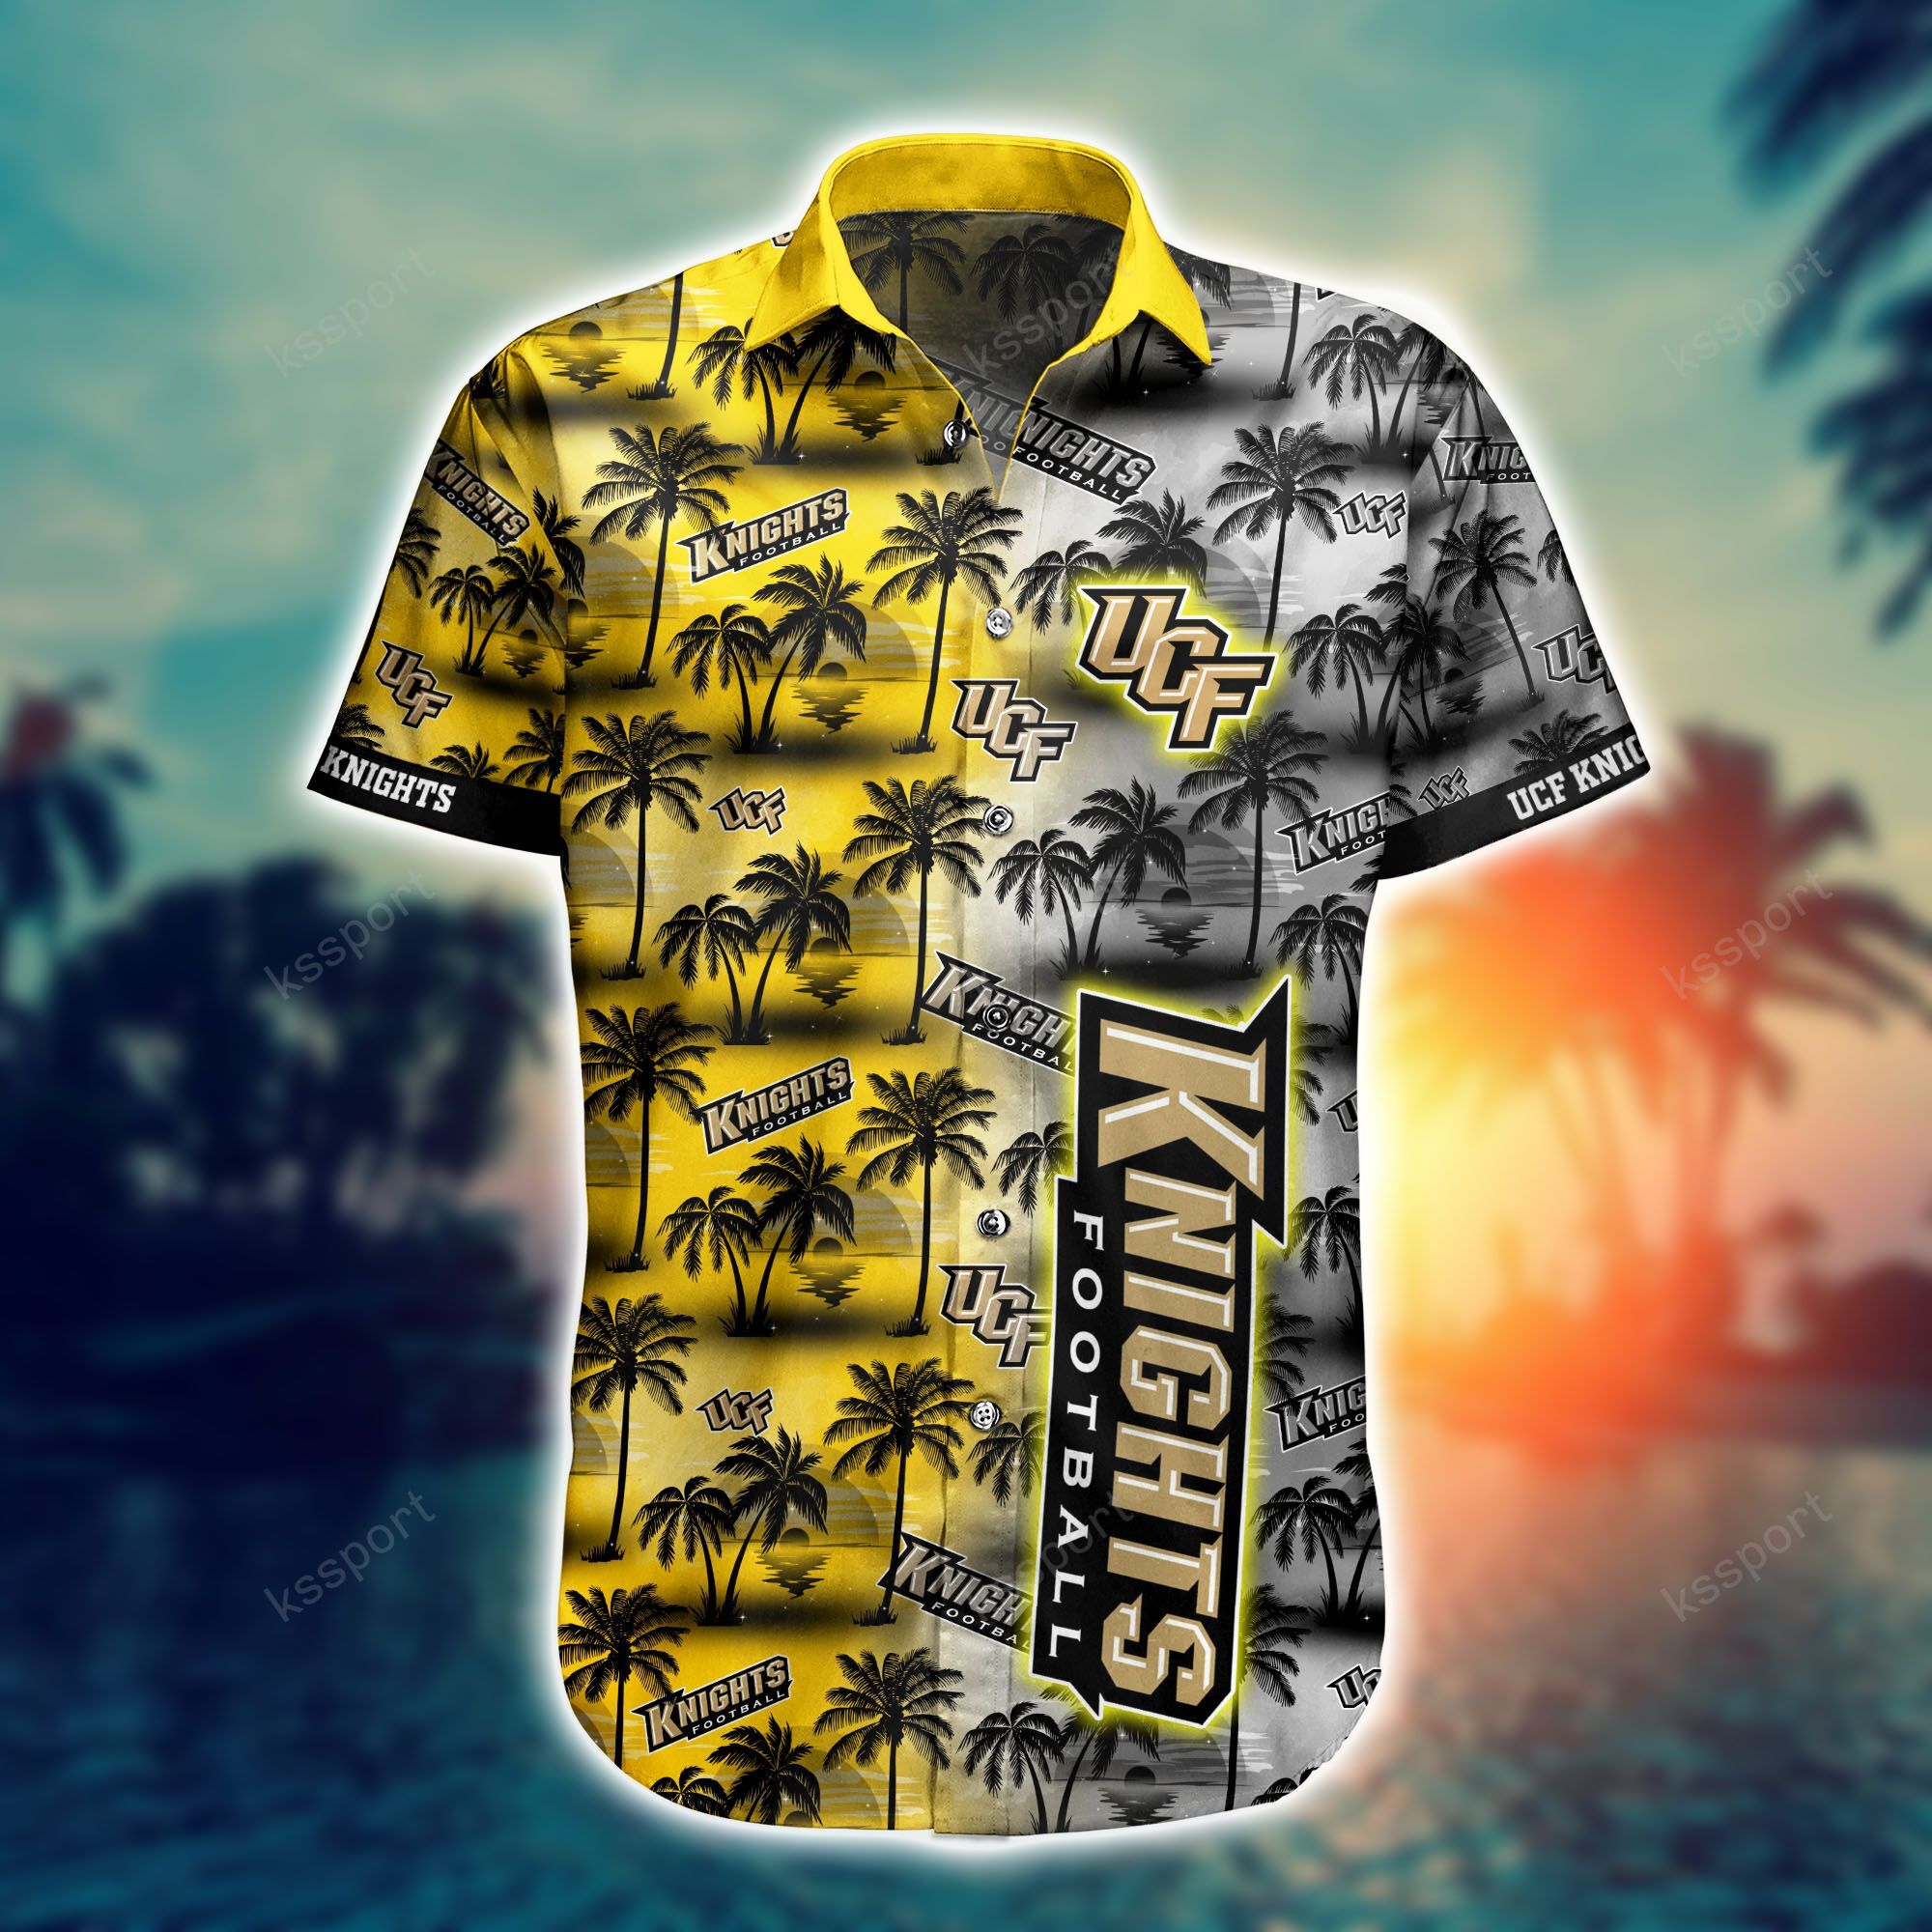 Top cool Hawaiian shirt 2022 - Make sure you get yours today before they run out! 179